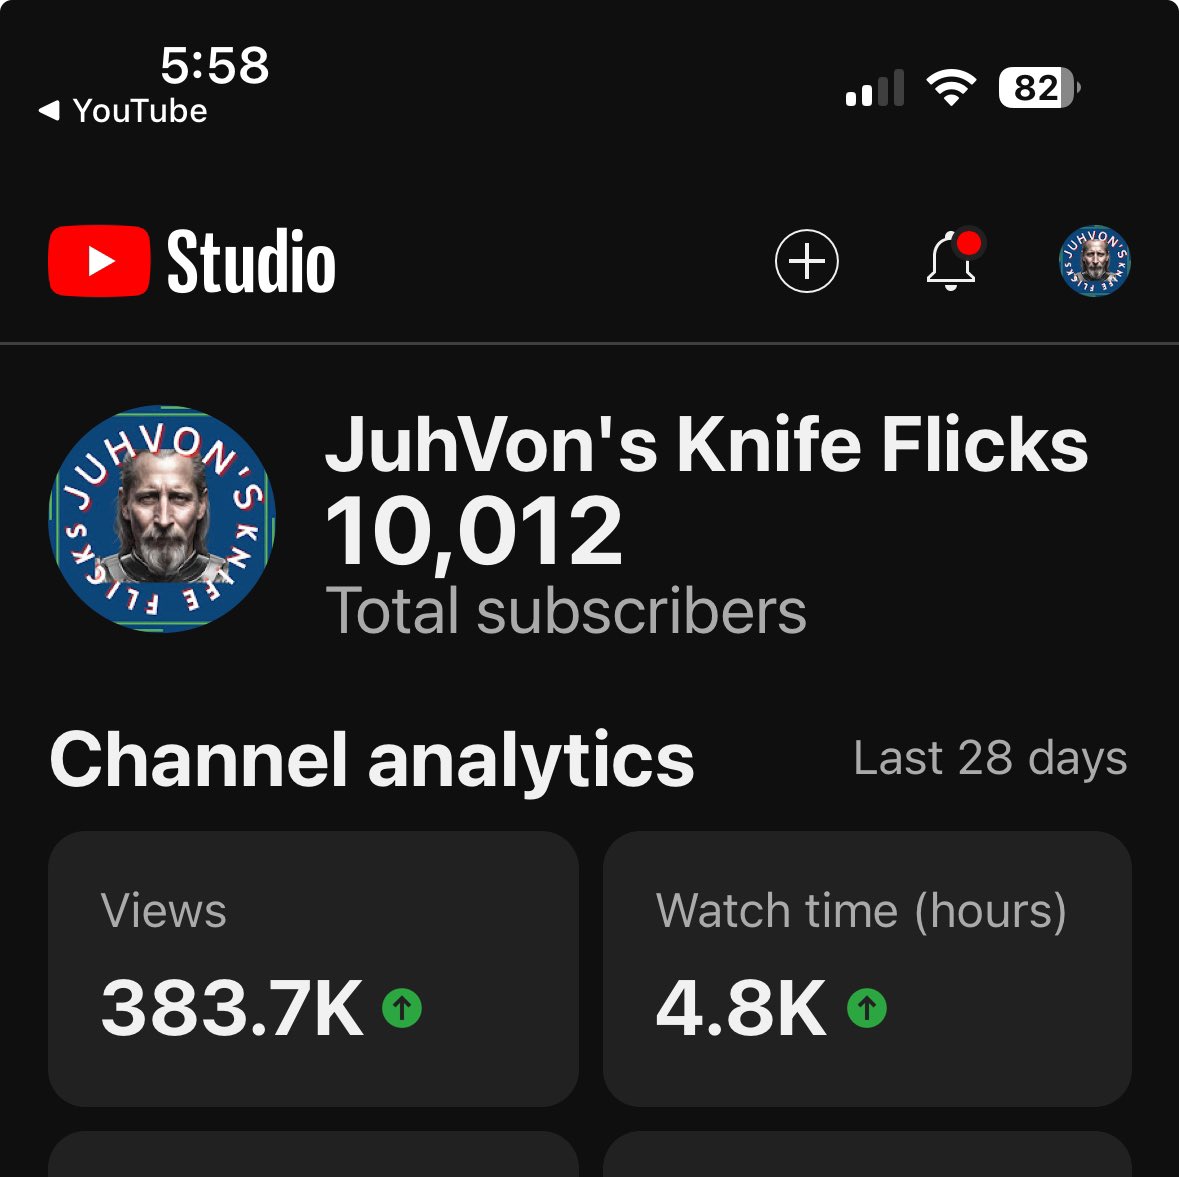 Wow! I am Stoked and EXTREMELY Humbled so many of you have supported my little Knife Channel!!
I am excited to see what cool Sharp Shit (and Wonderful Human Beings) the Future Brings✊🏼💜🙌🏼!

I love you All and PLEASE, Choose Debate, Not Hate✊🏼💜!

#tools #edc #knife #knifelife